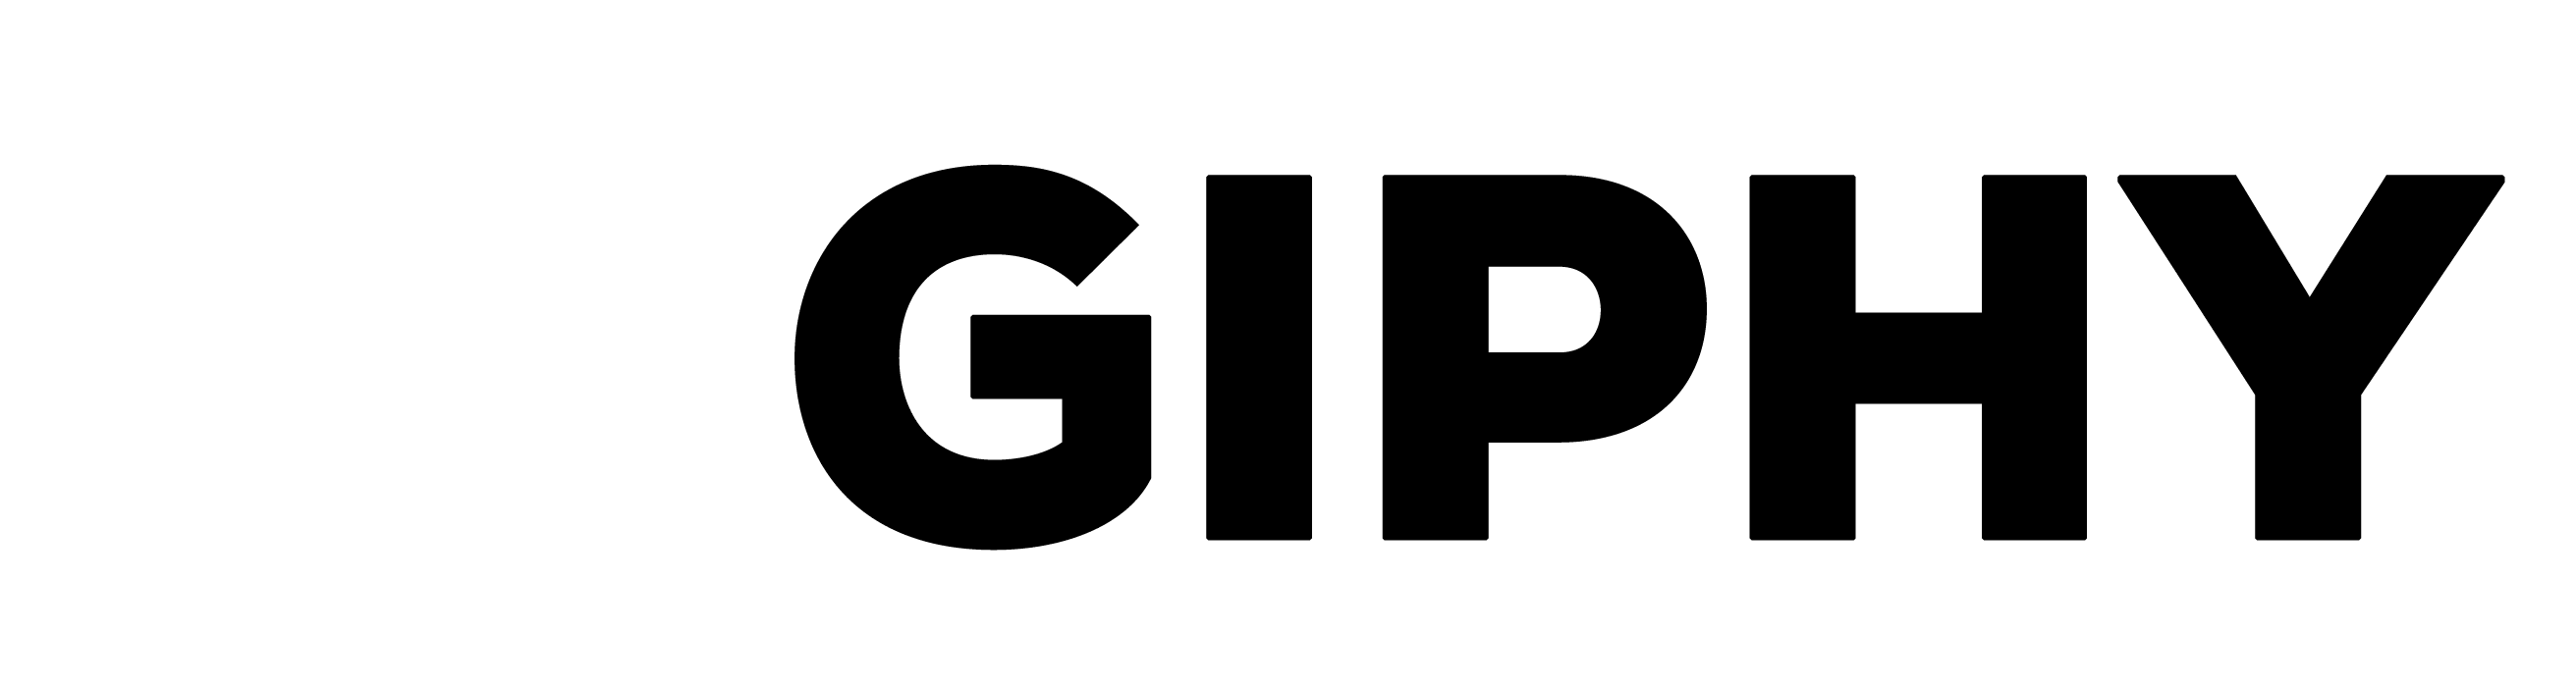 The Giphy logo